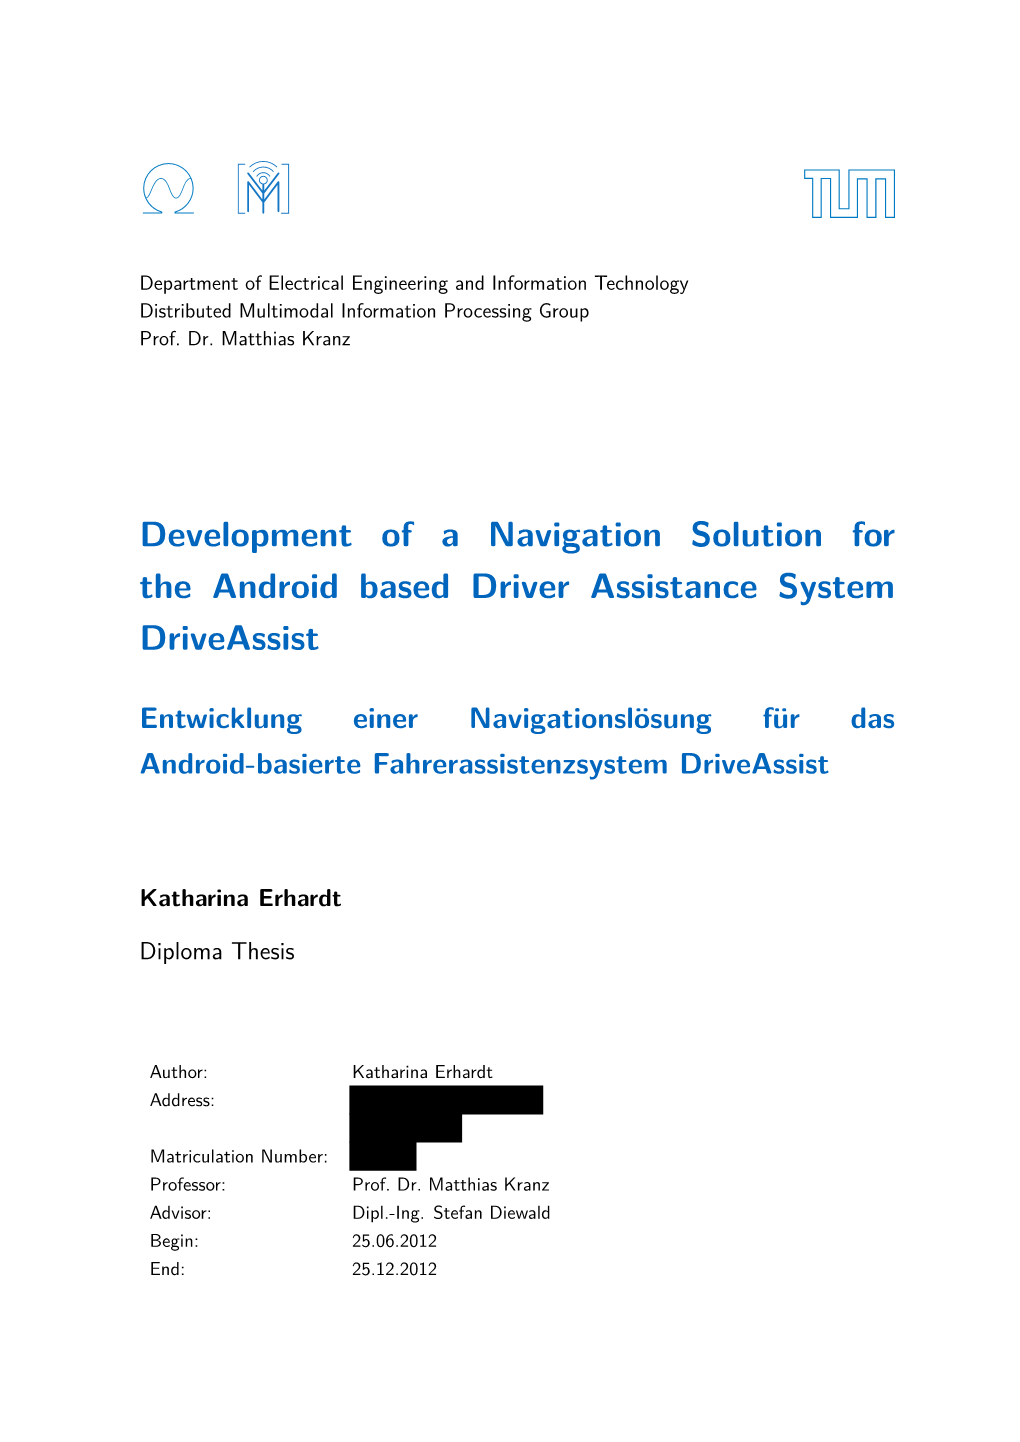 Development of a Navigation Solution for the Android Based Driver Assistance System Driveassist